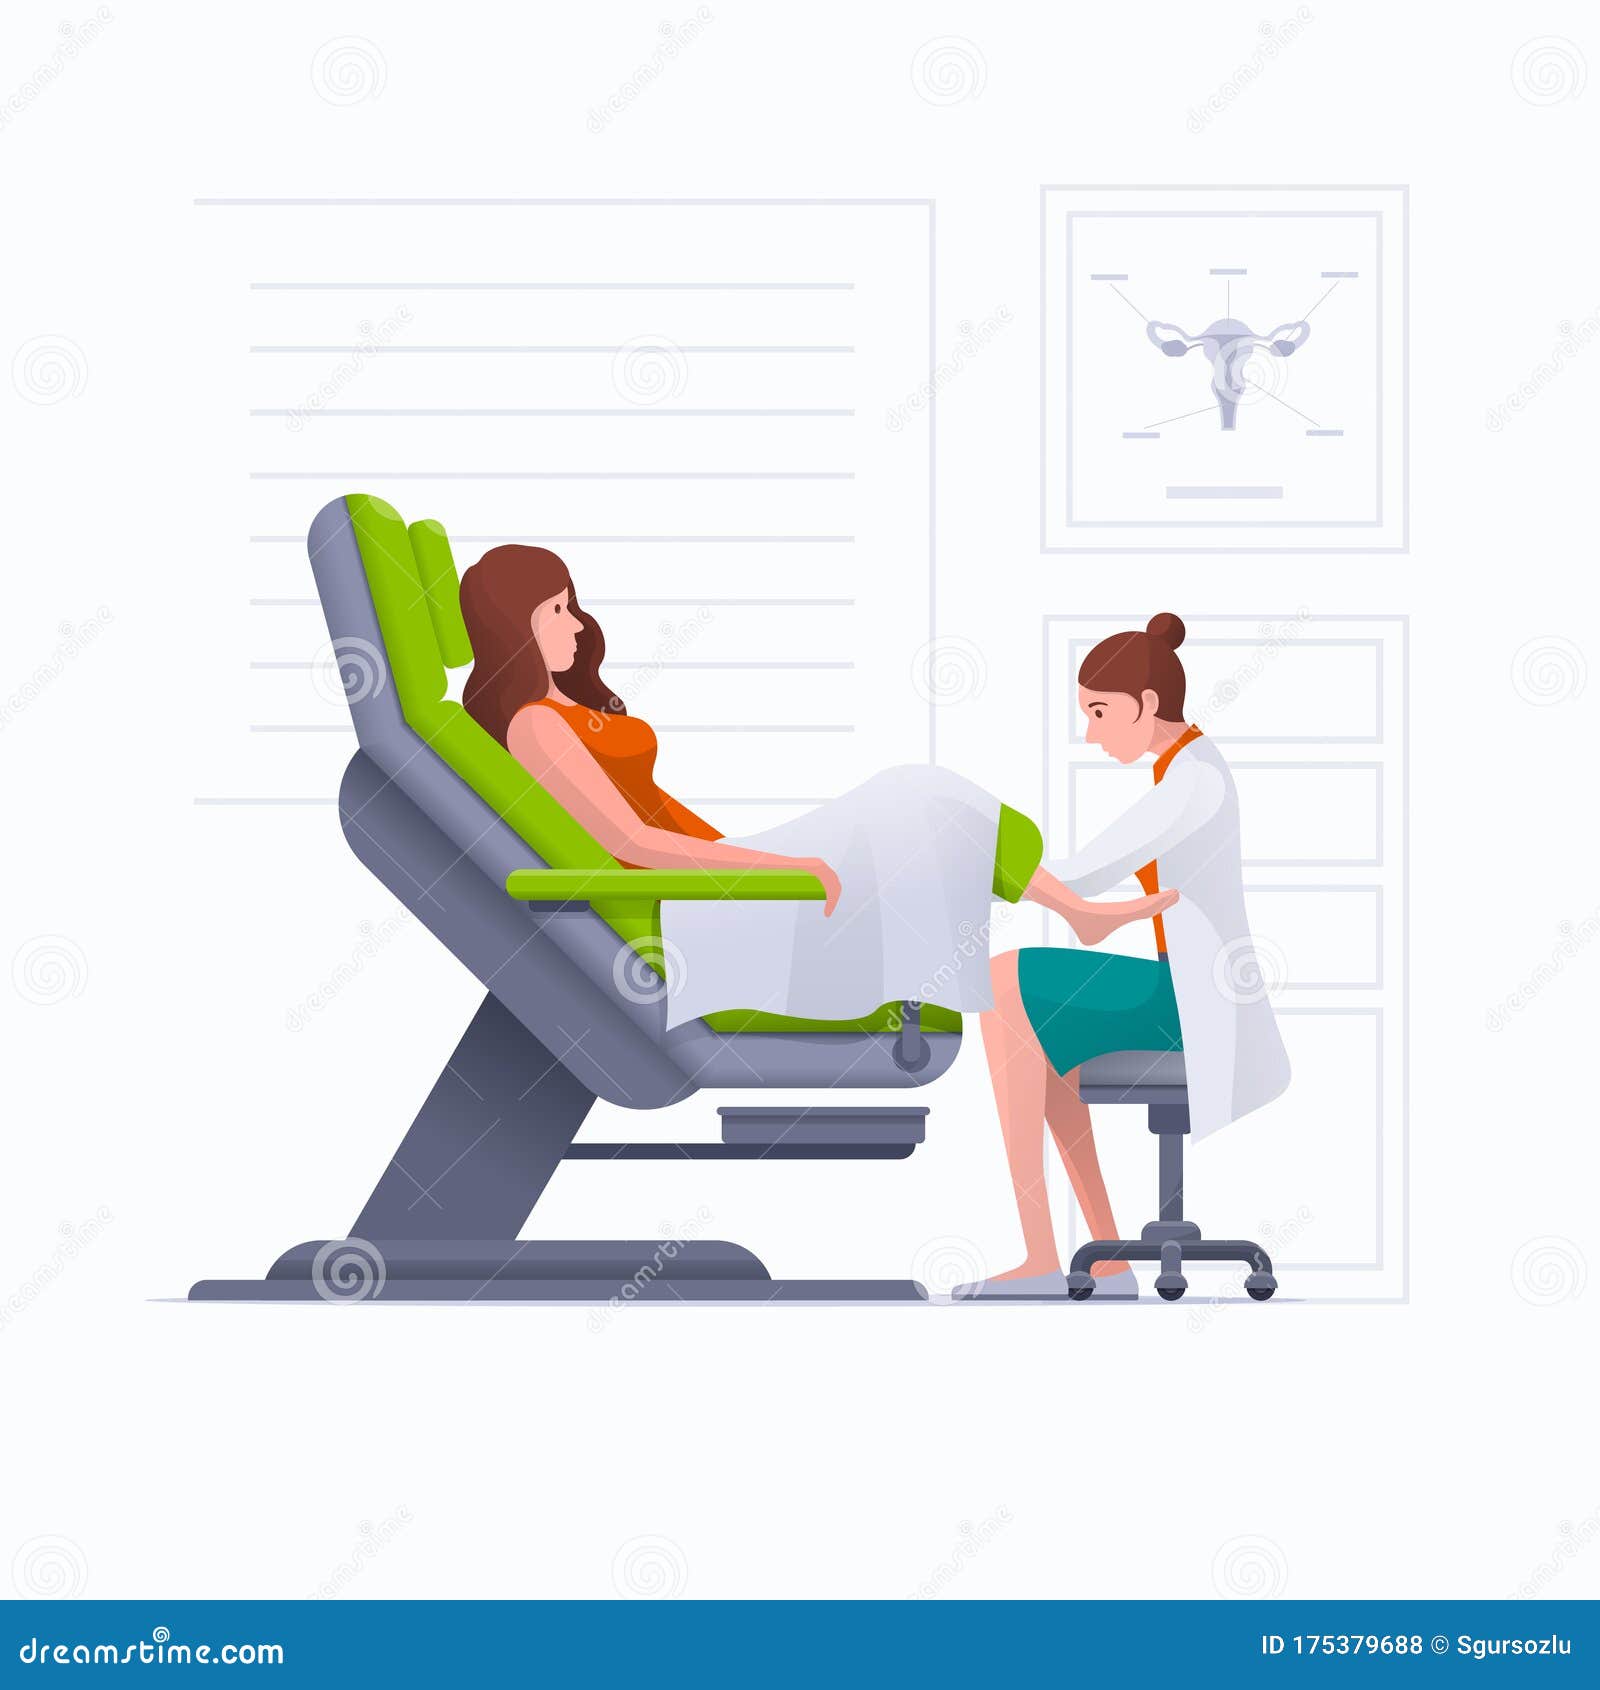 young pregnant woman or woman is lying in gynecological examination chair during gynecological exam